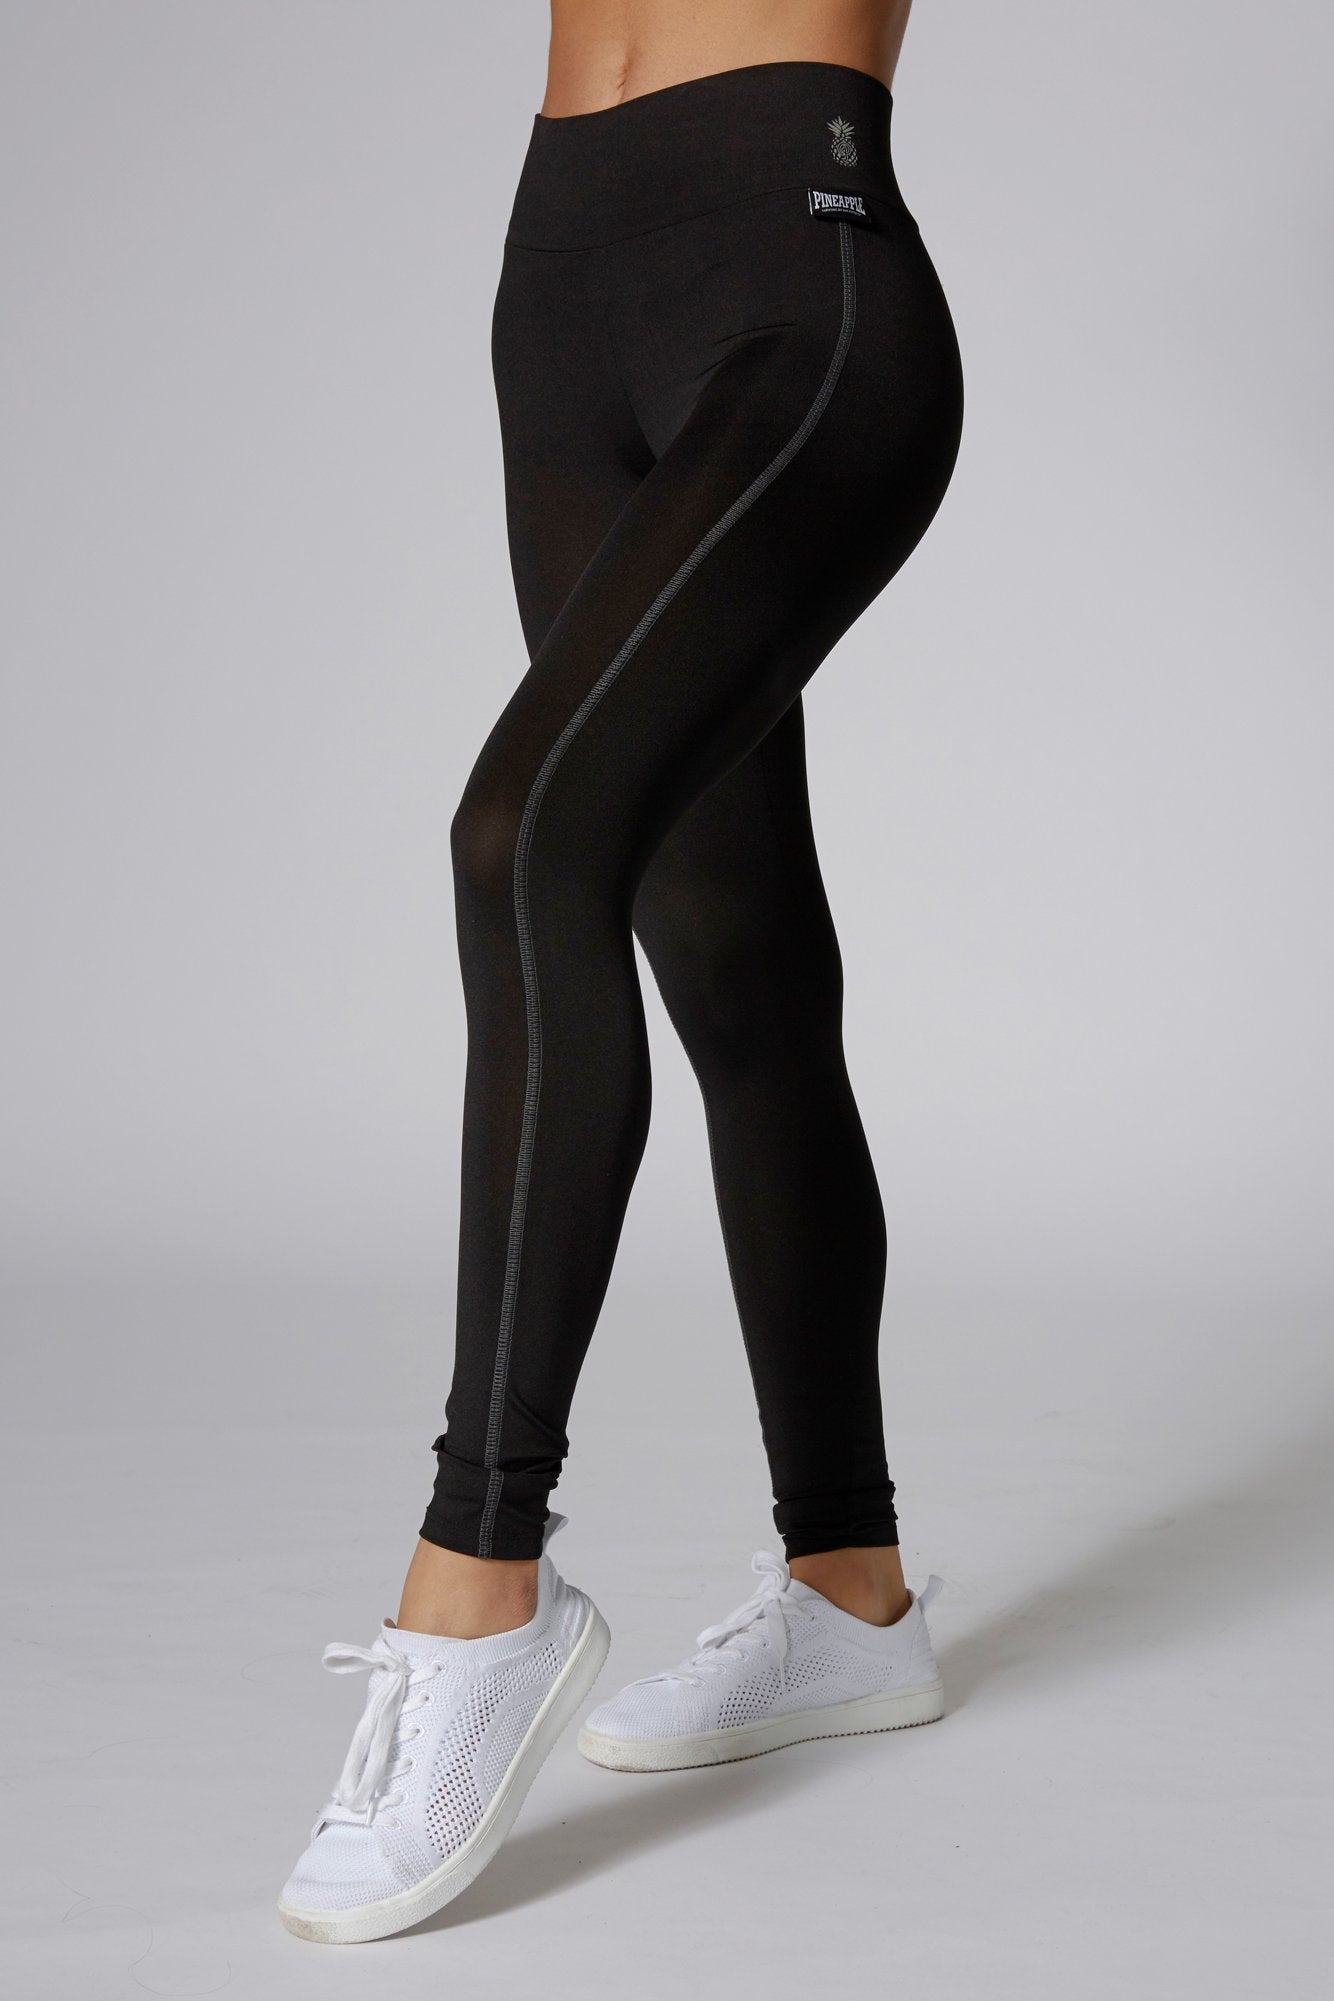 Buy Pineapple Wide Band High Waisted Leggings from Next USA